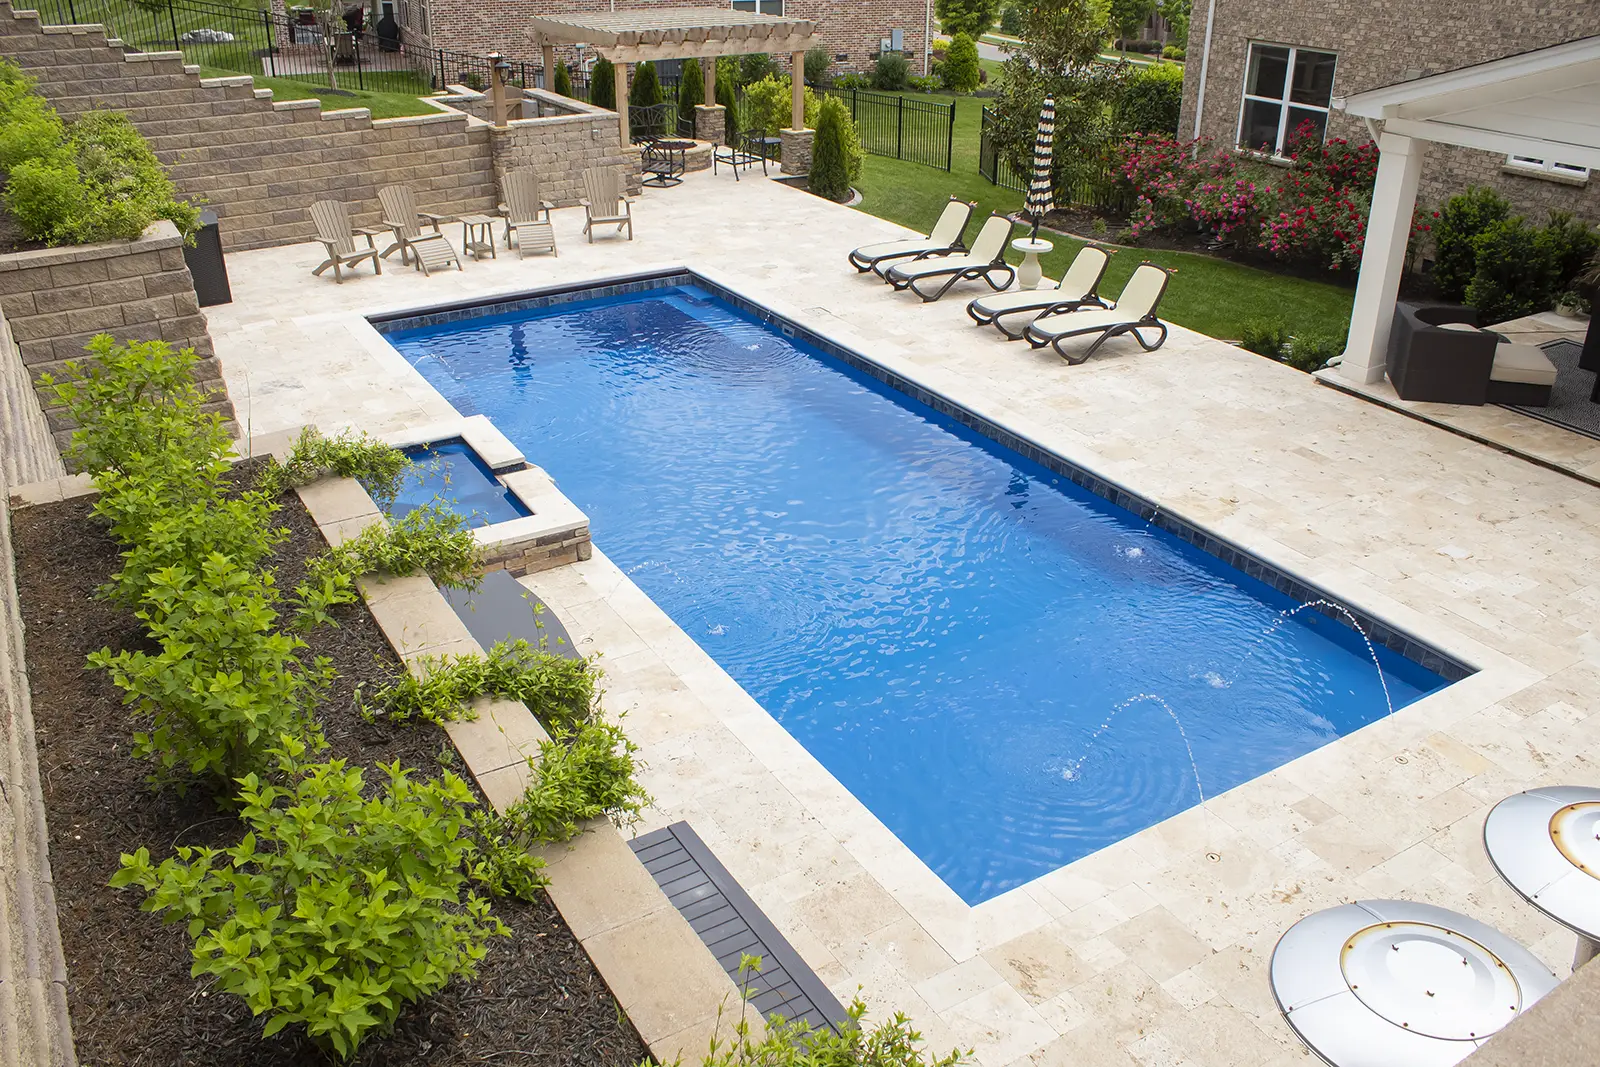 The Leisure Pools Pinnacle™ - let us install your pool in Knox County TN